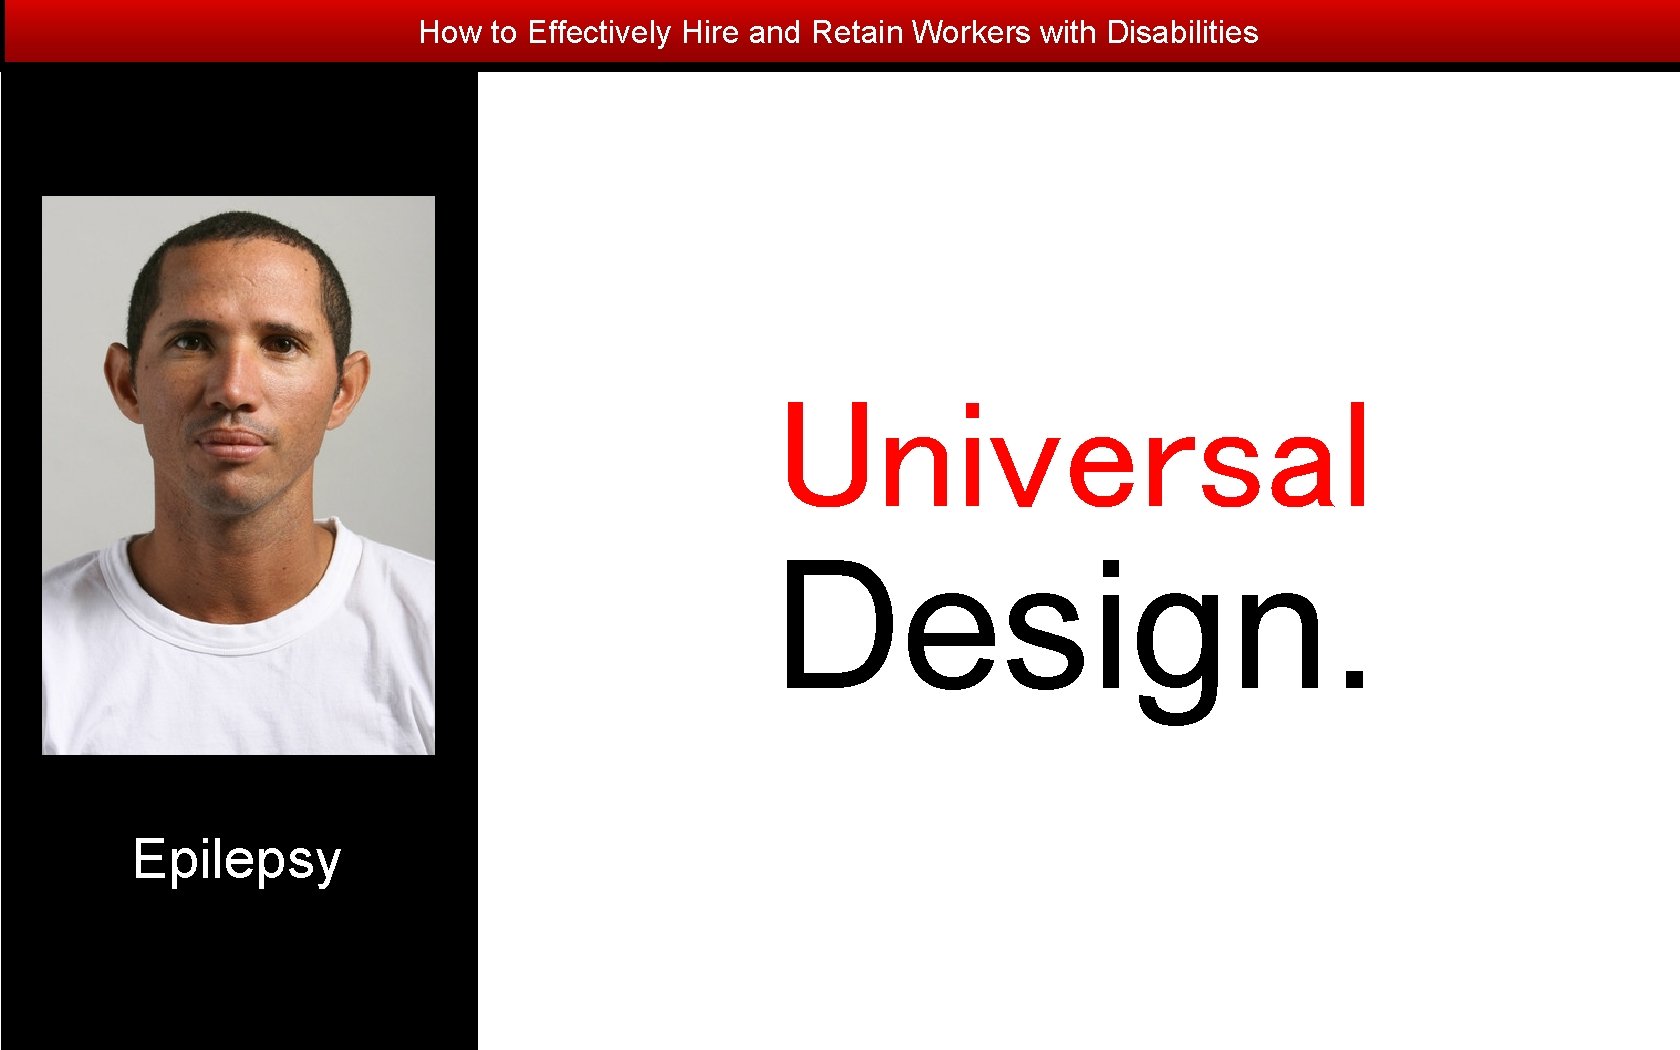 How to Effectively Hire and Retain Workers with Disabilities Universal Design. Epilepsy 